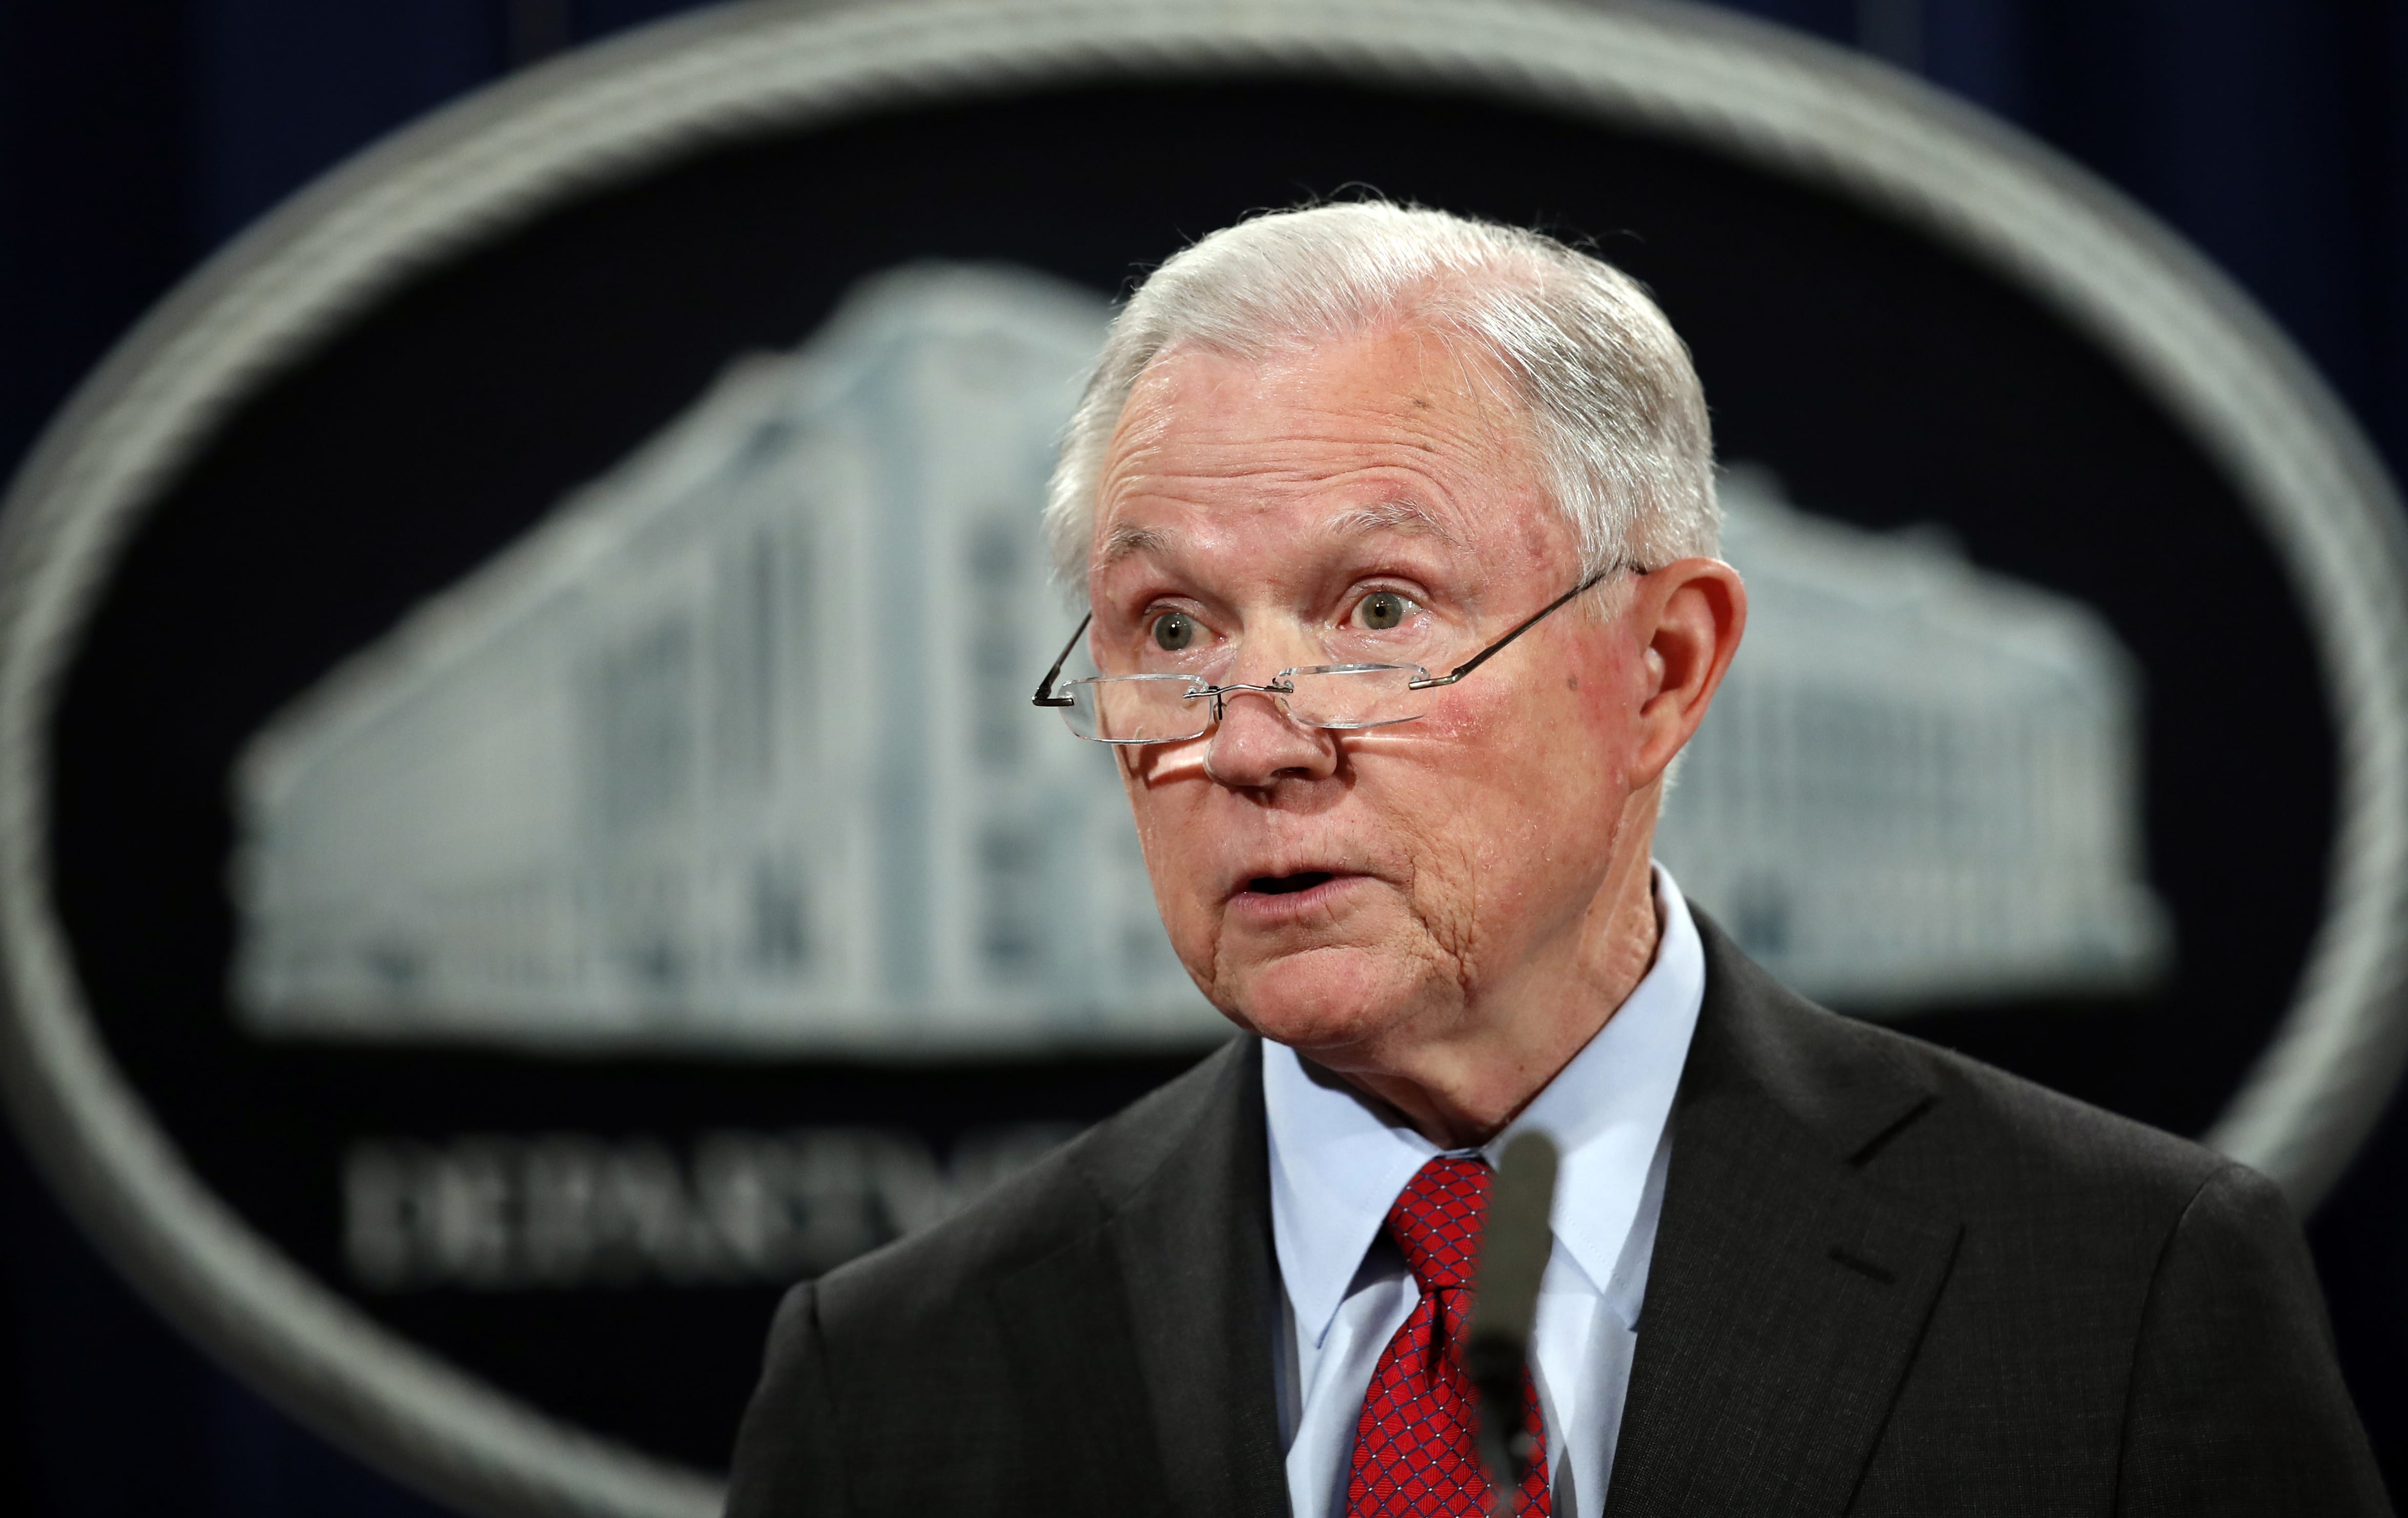 FILE - In this Dec. 15, 2017, file photo, United States Attorney General Jeff Sessions speaks during a news conference at the Justice Department in Washington. Attorney General Jeff Sessions is going after legalized marijuana. Sessions is rescinding a policy that had let legalized marijuana flourish without federal intervention across the country.  That's according to two people with direct knowledge of the decision.